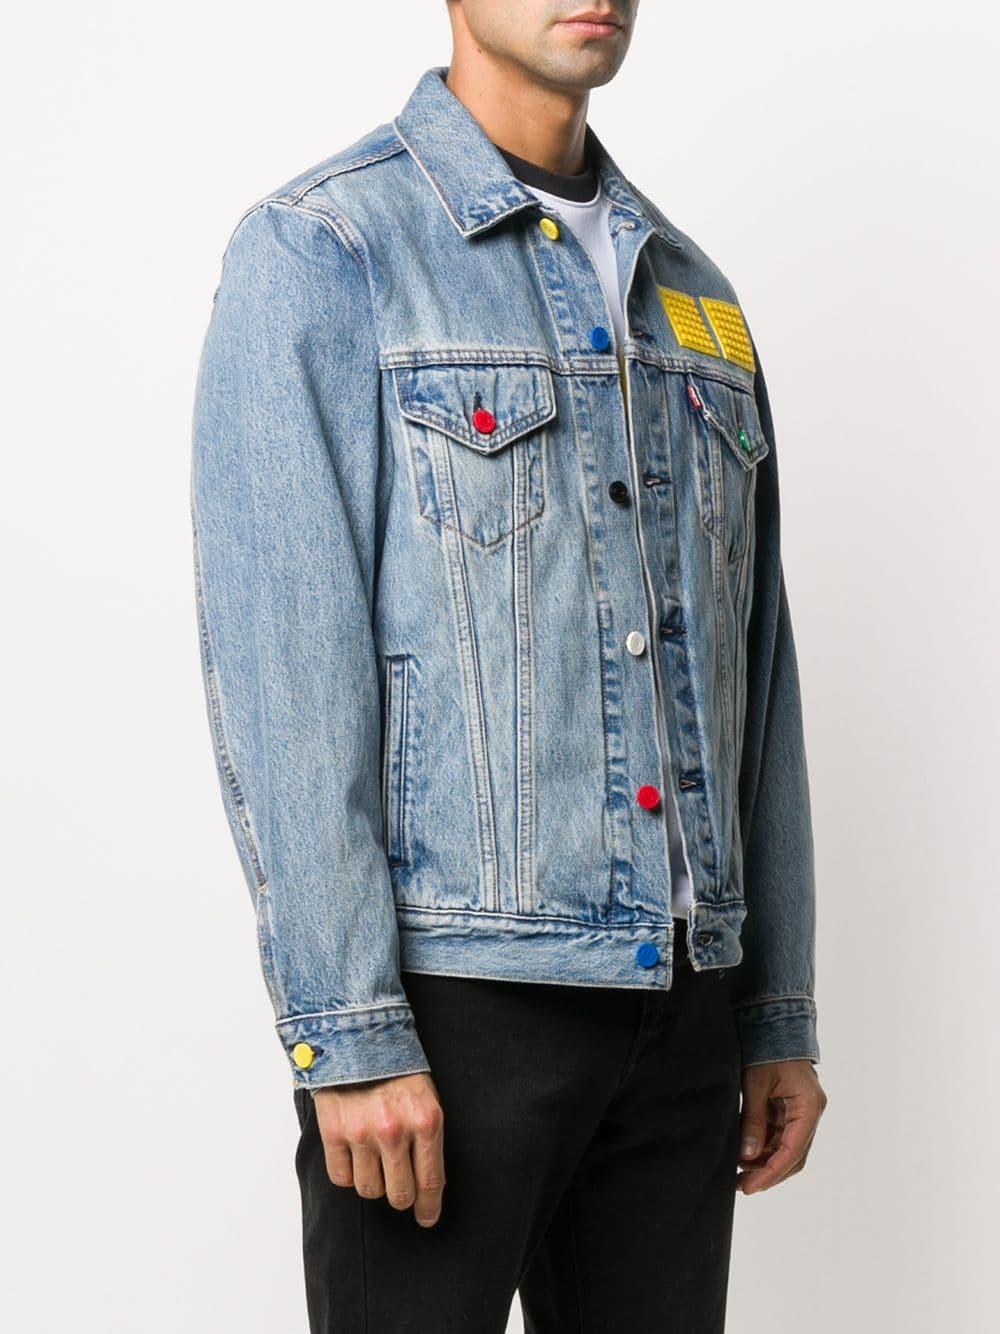 Levi's Lego Patches Denim Jacket in Blue for Men | Lyst